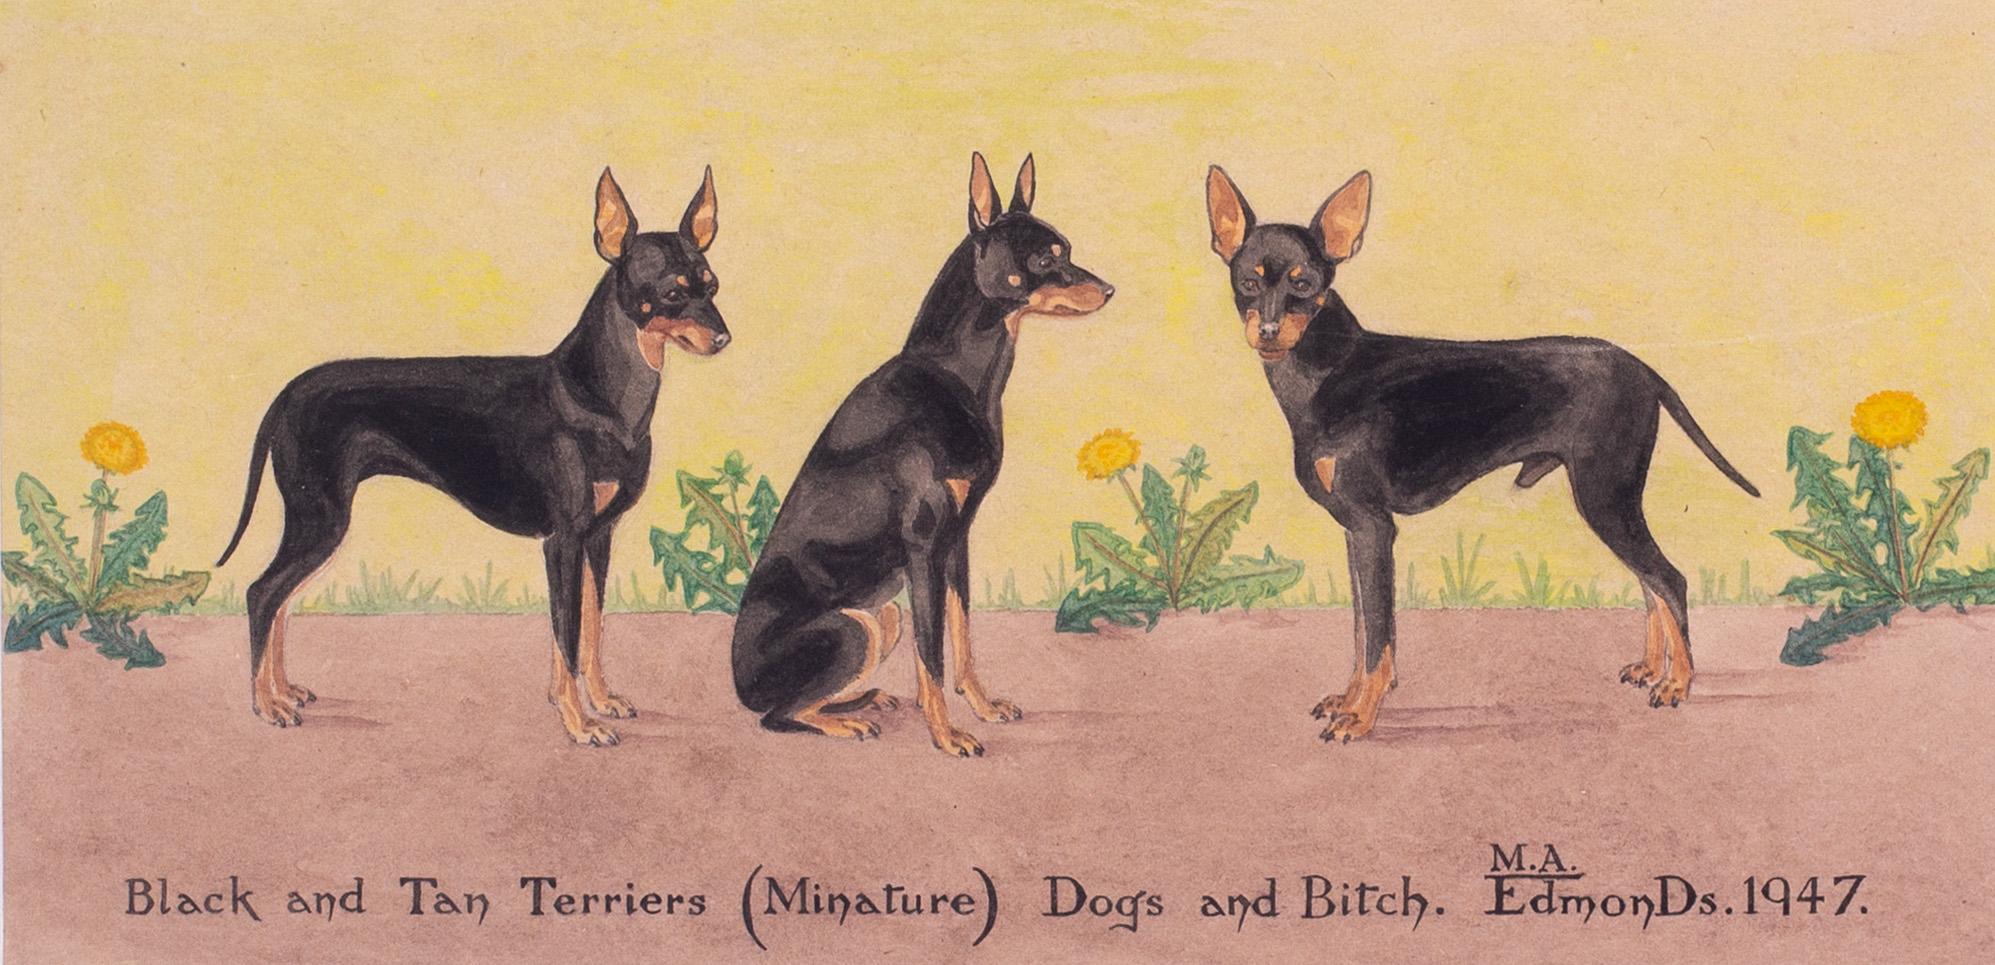 British mid century watercolour and pen drawing of black and tan terrier dogs - Art by Mona Alizon Edmonds